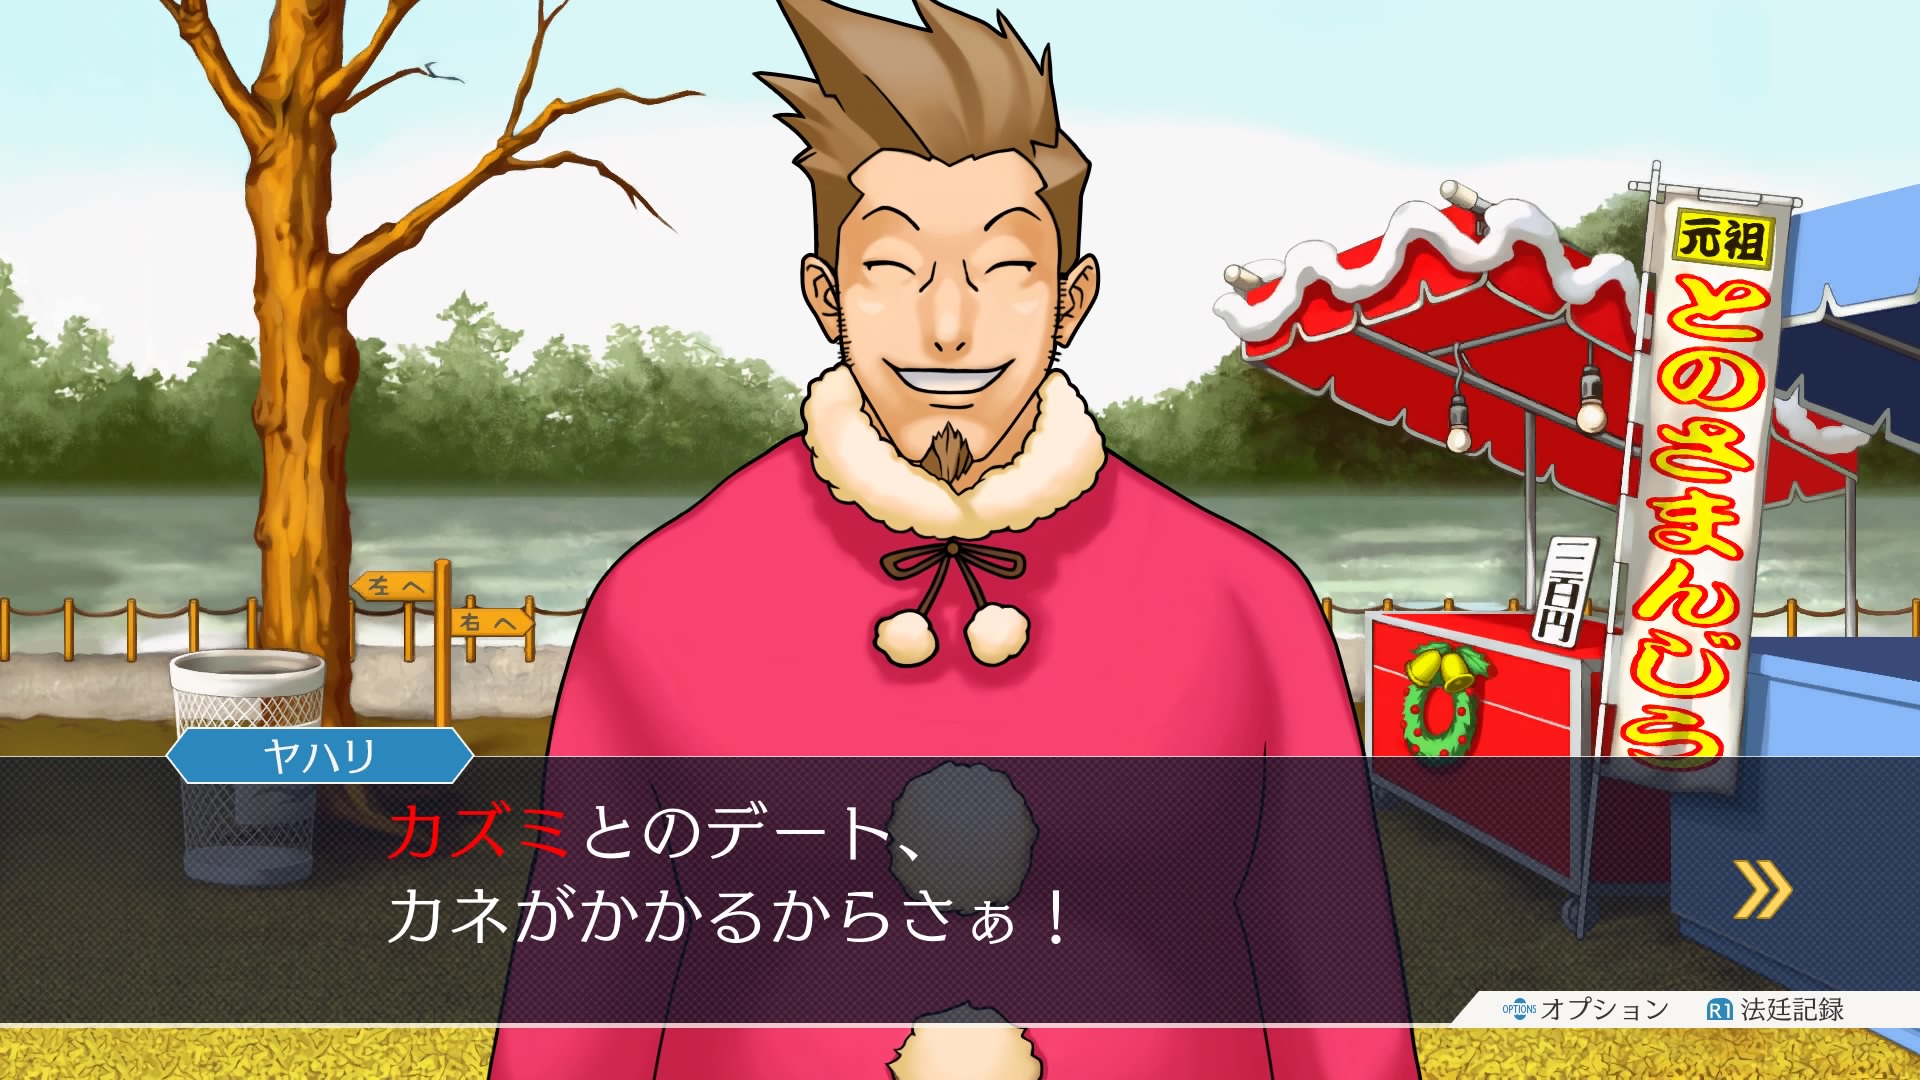 Phoenix Wright Ace Attorney Trilogy New Pearl Fey And Larry Butz Screenshots Nintendo Everything